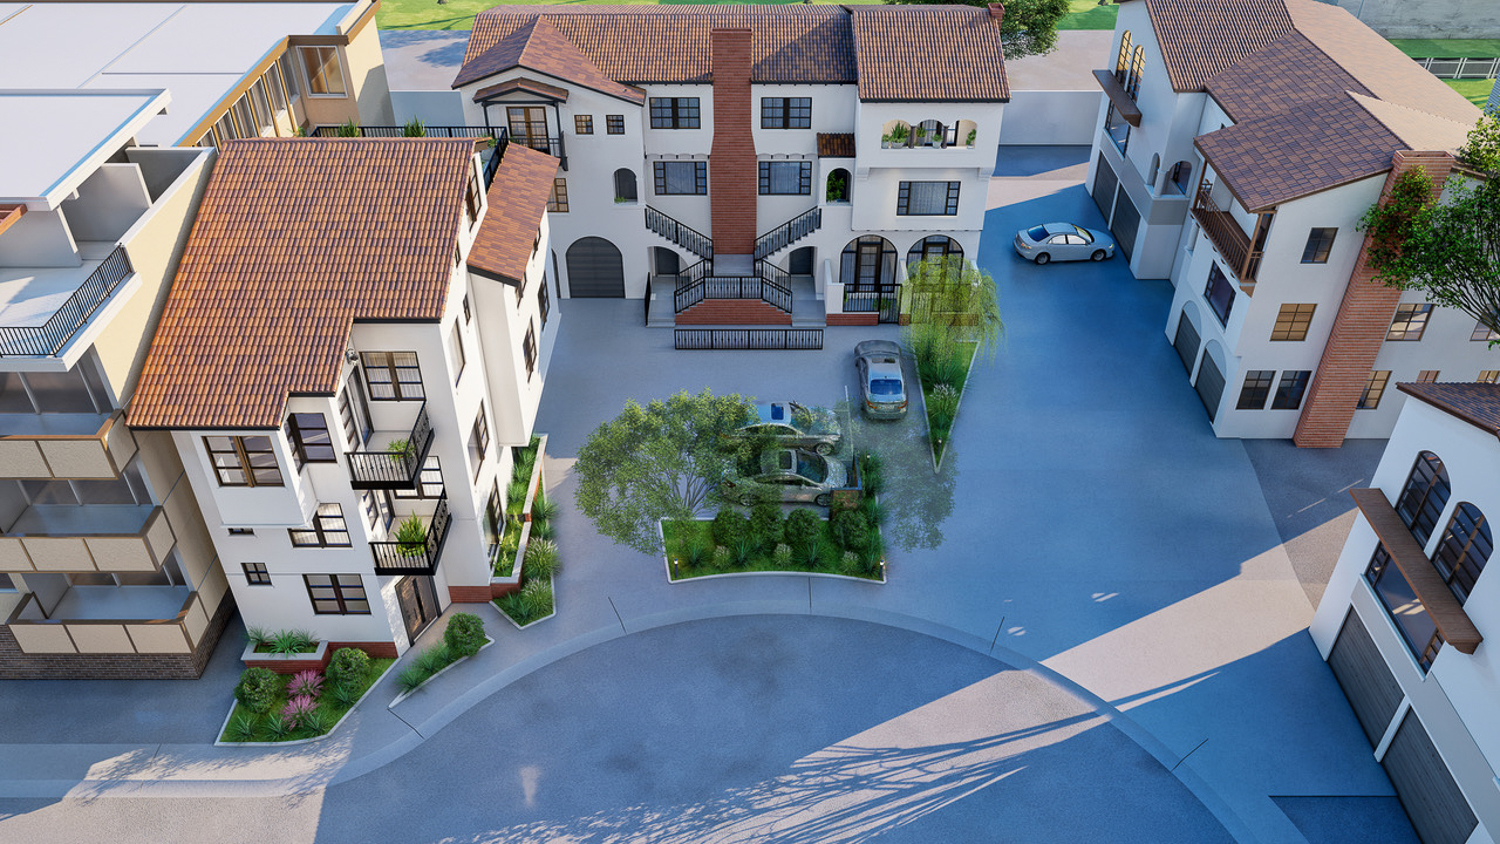 23-31 Excelsior Court aerial perspective, rendering courtesy Harvey Architecture